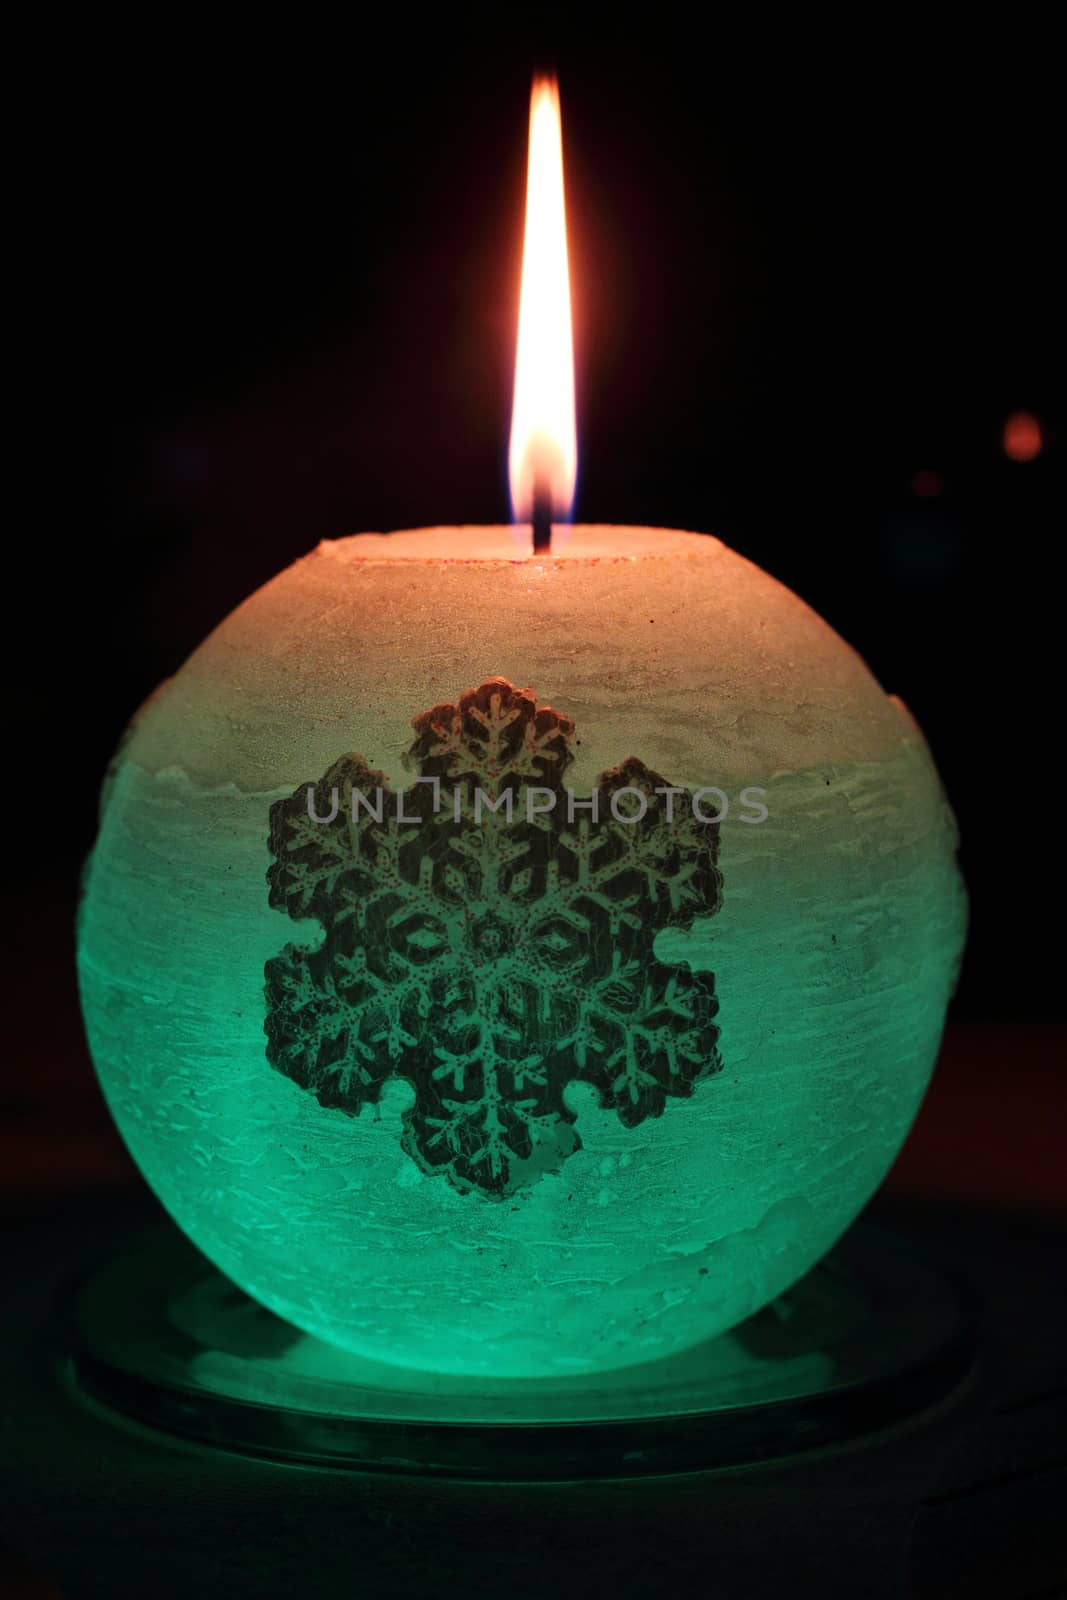 Glowing candle with a diode and snowflake lights up in the dark